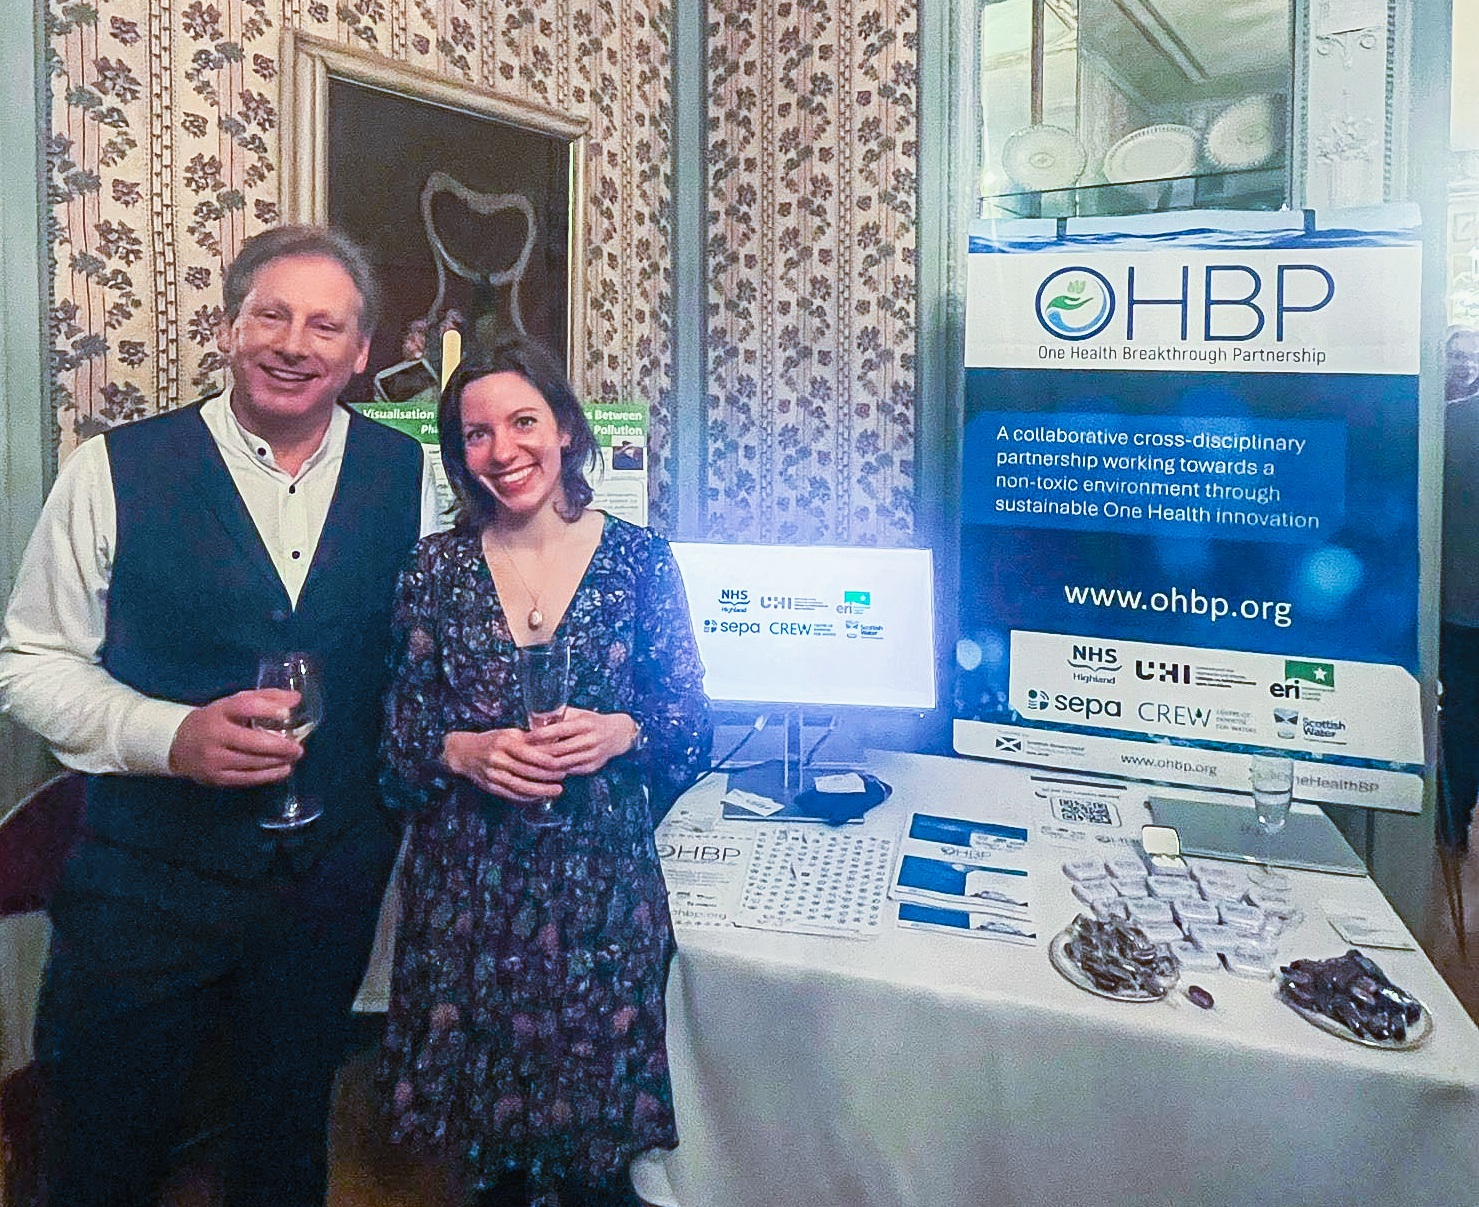 Highland scientists showcase ground-breaking project at European One Health Fair

